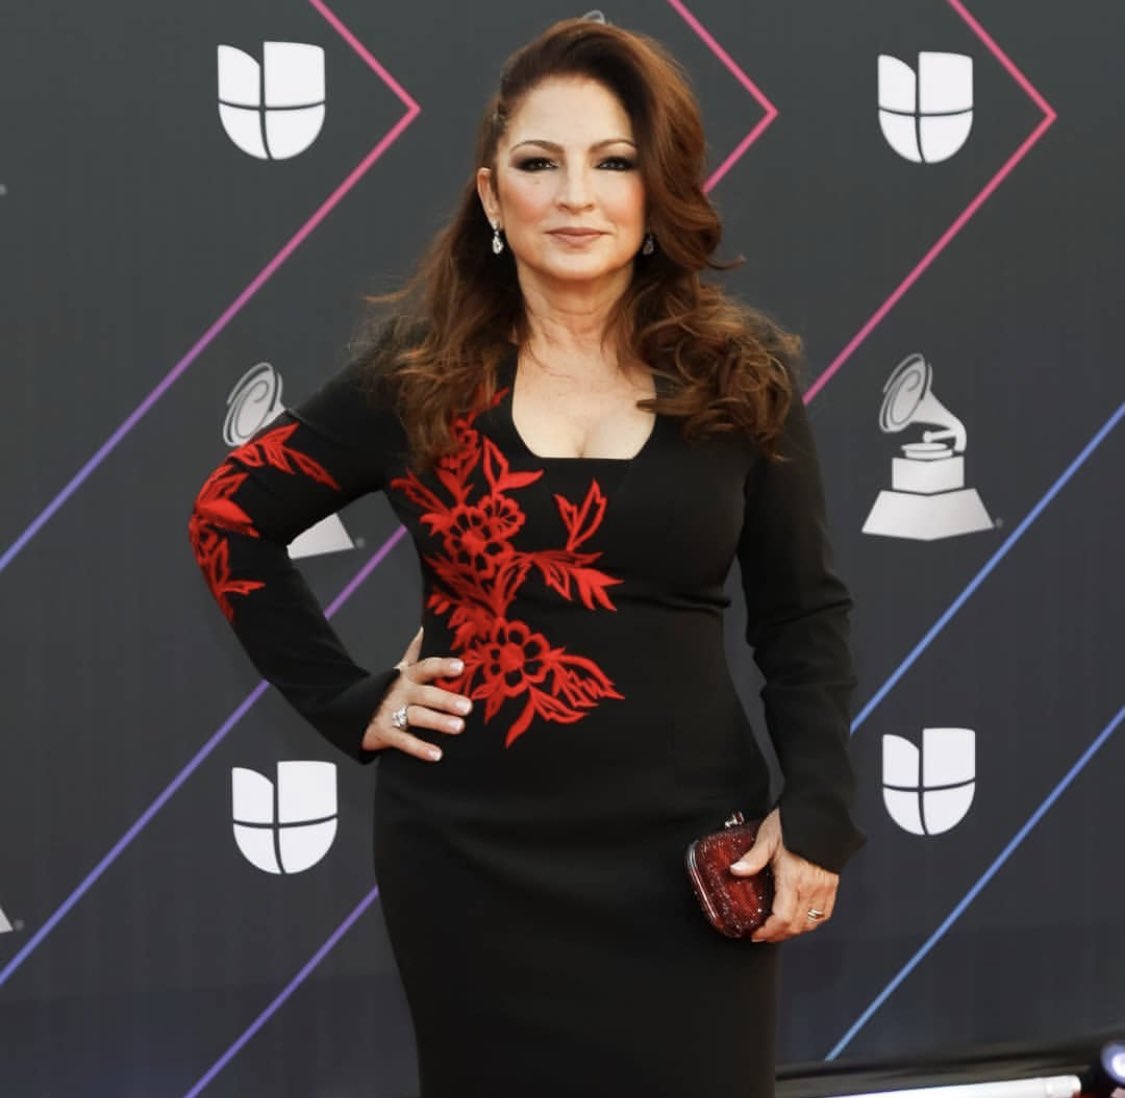 I mean!! ❤️‍🔥❤️‍🔥❤️‍🔥❤️‍🔥 Sexiest Couple at the Latin Grammys Award goes to @GloriaEstefan y @EmilioEstefanJr!! Congrats again on winning for Best Contemporary Tropical Album with #Brazil305!!! GIRL! You killed it tonight mama! ❤️🥰😍